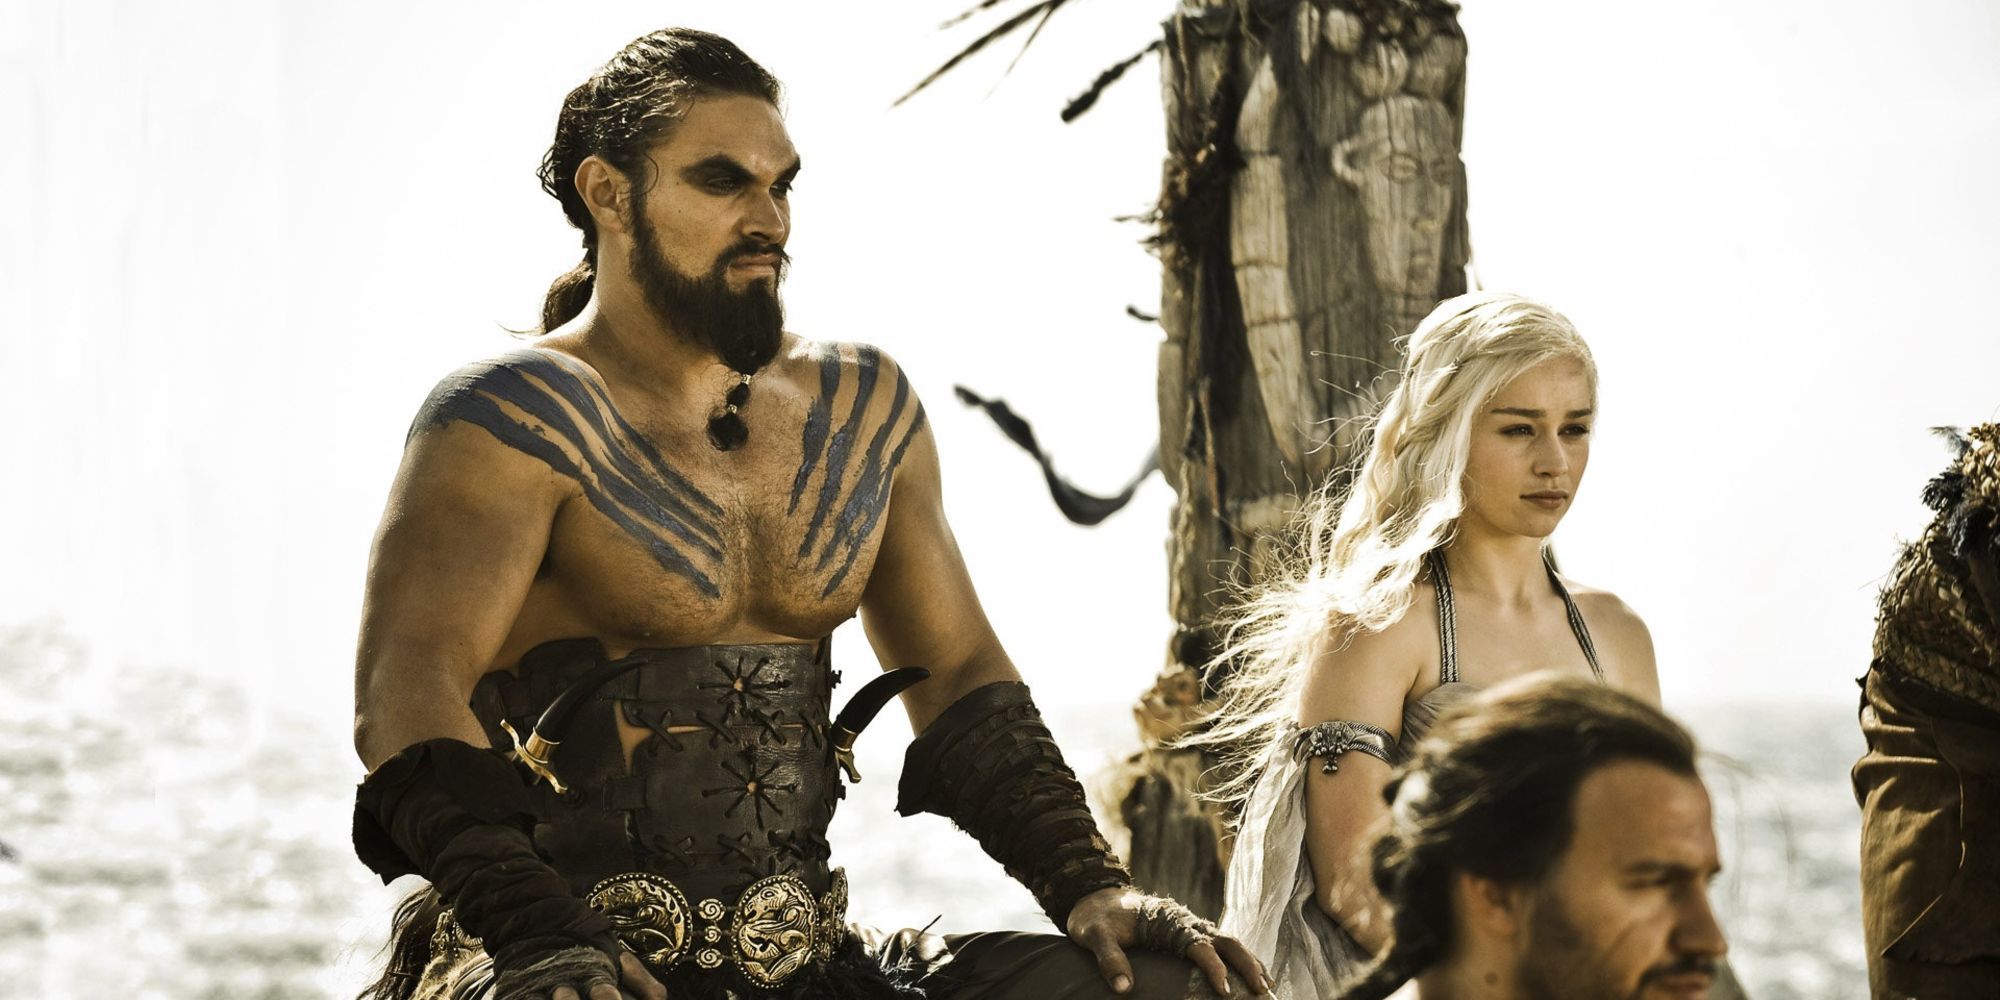 Daenerys and Drogo sitting side by side in Game of Thrones